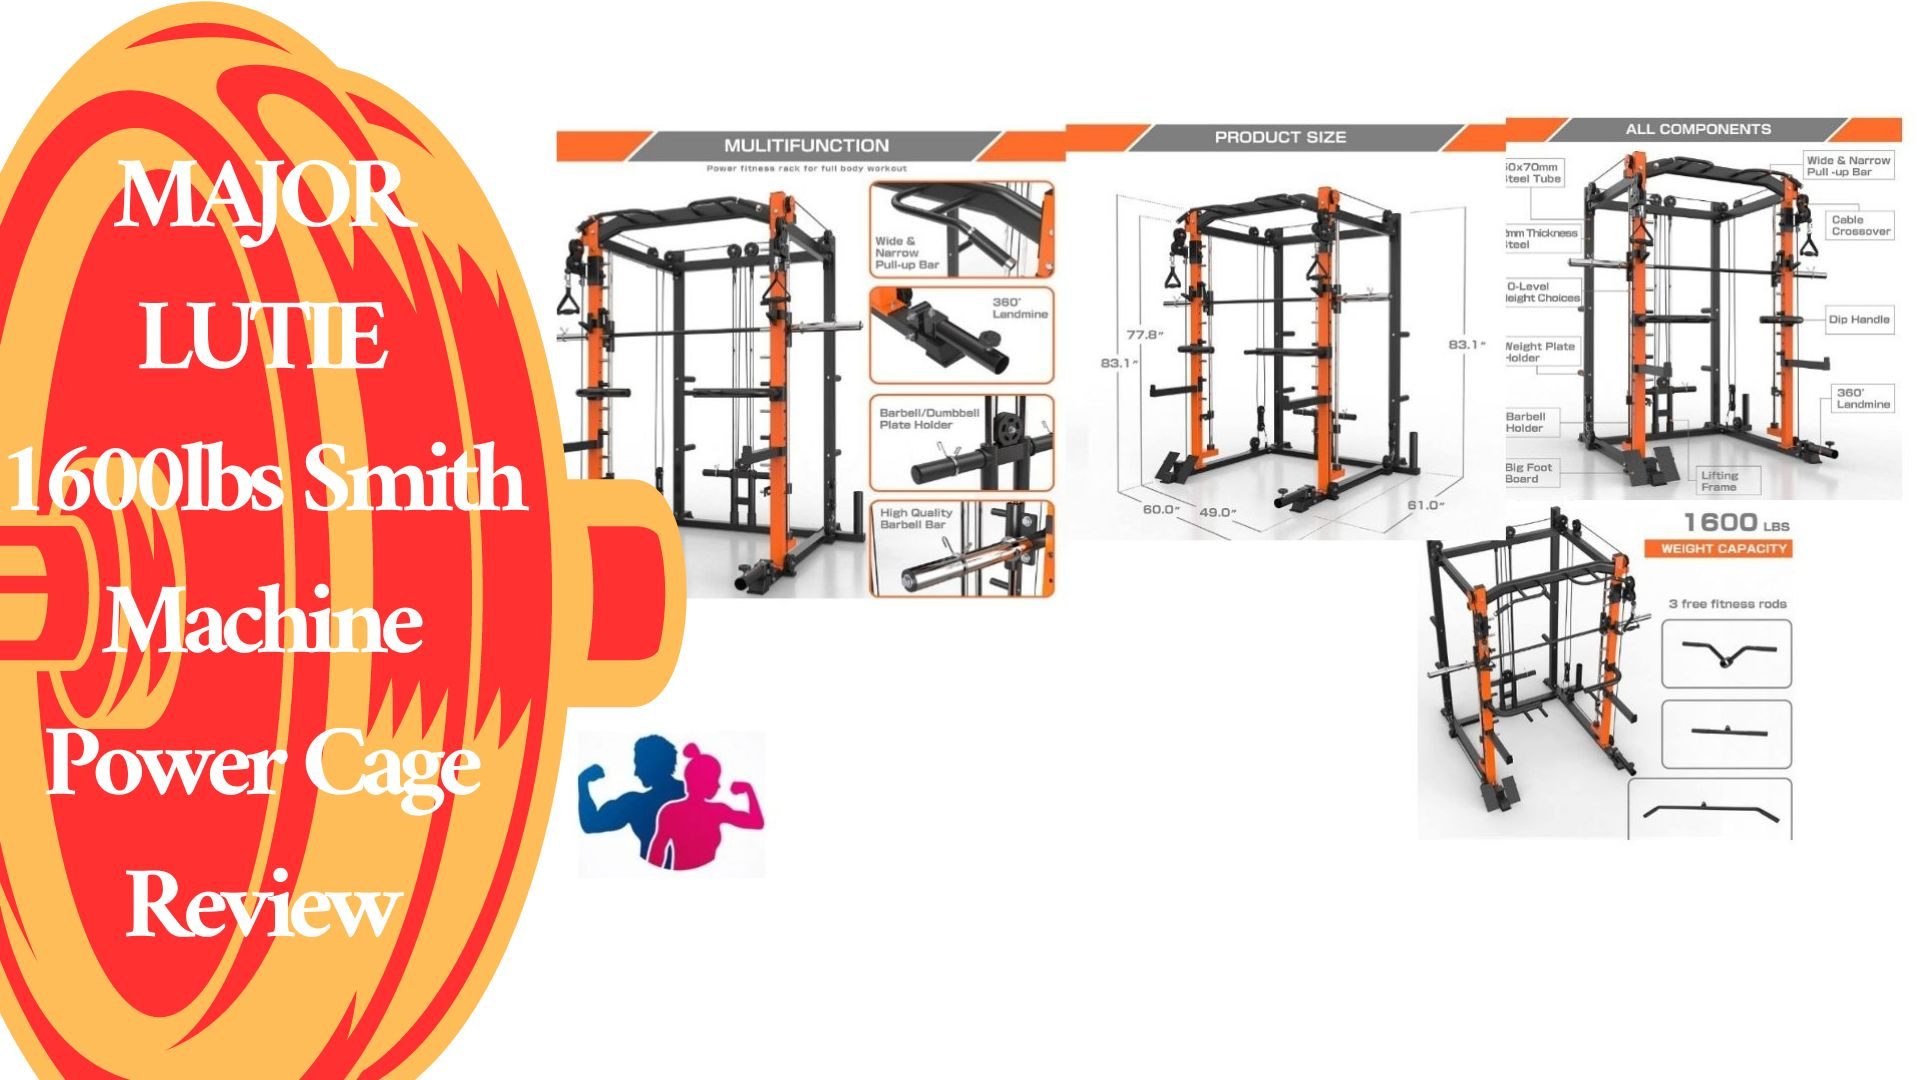 MAJOR LUTIE 1600lbs Smith Machine Power Cage Review